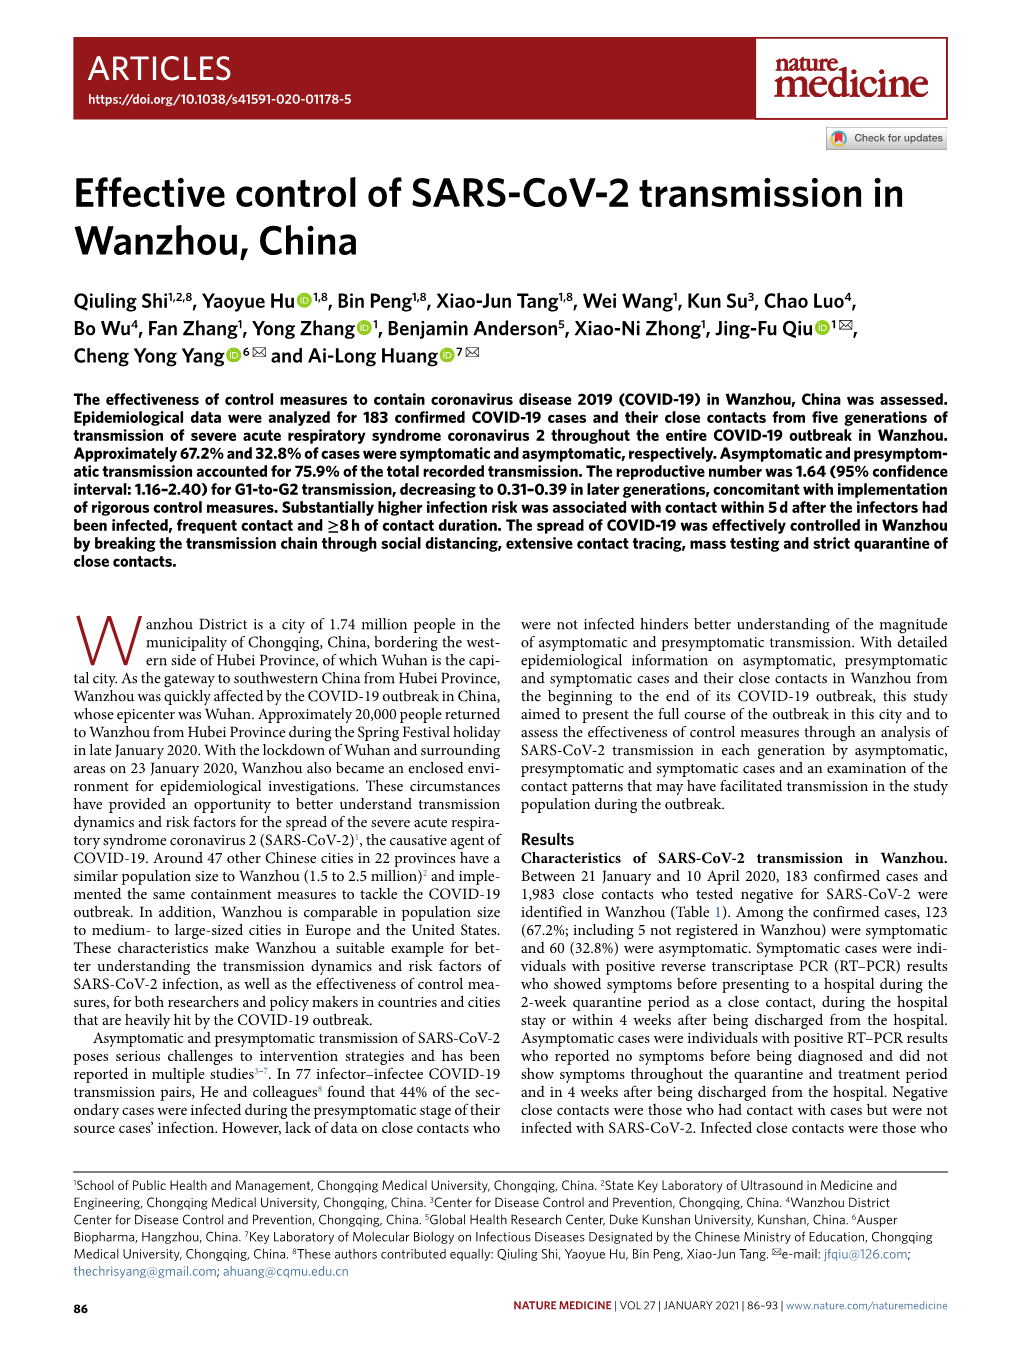 Effective Control of SARS-Cov-2 Transmission in Wanzhou, China